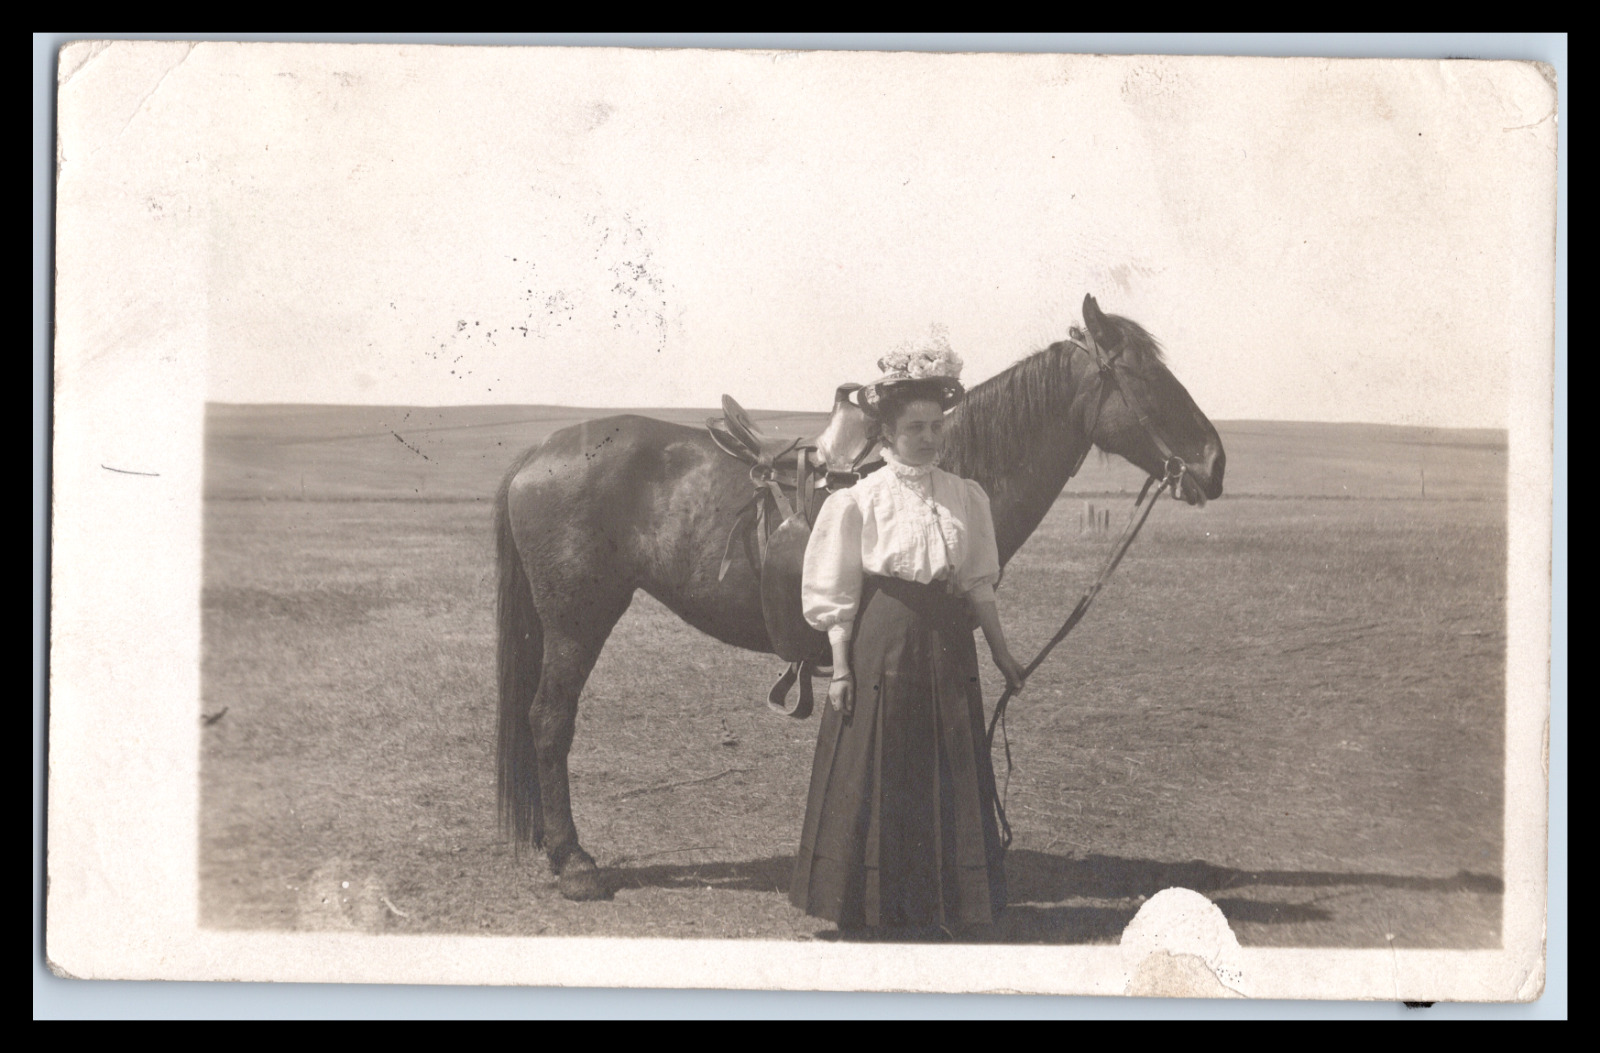 Vintage Postcards RPPC Edwardian Woman Holding Reins of a Horse Early 1900's